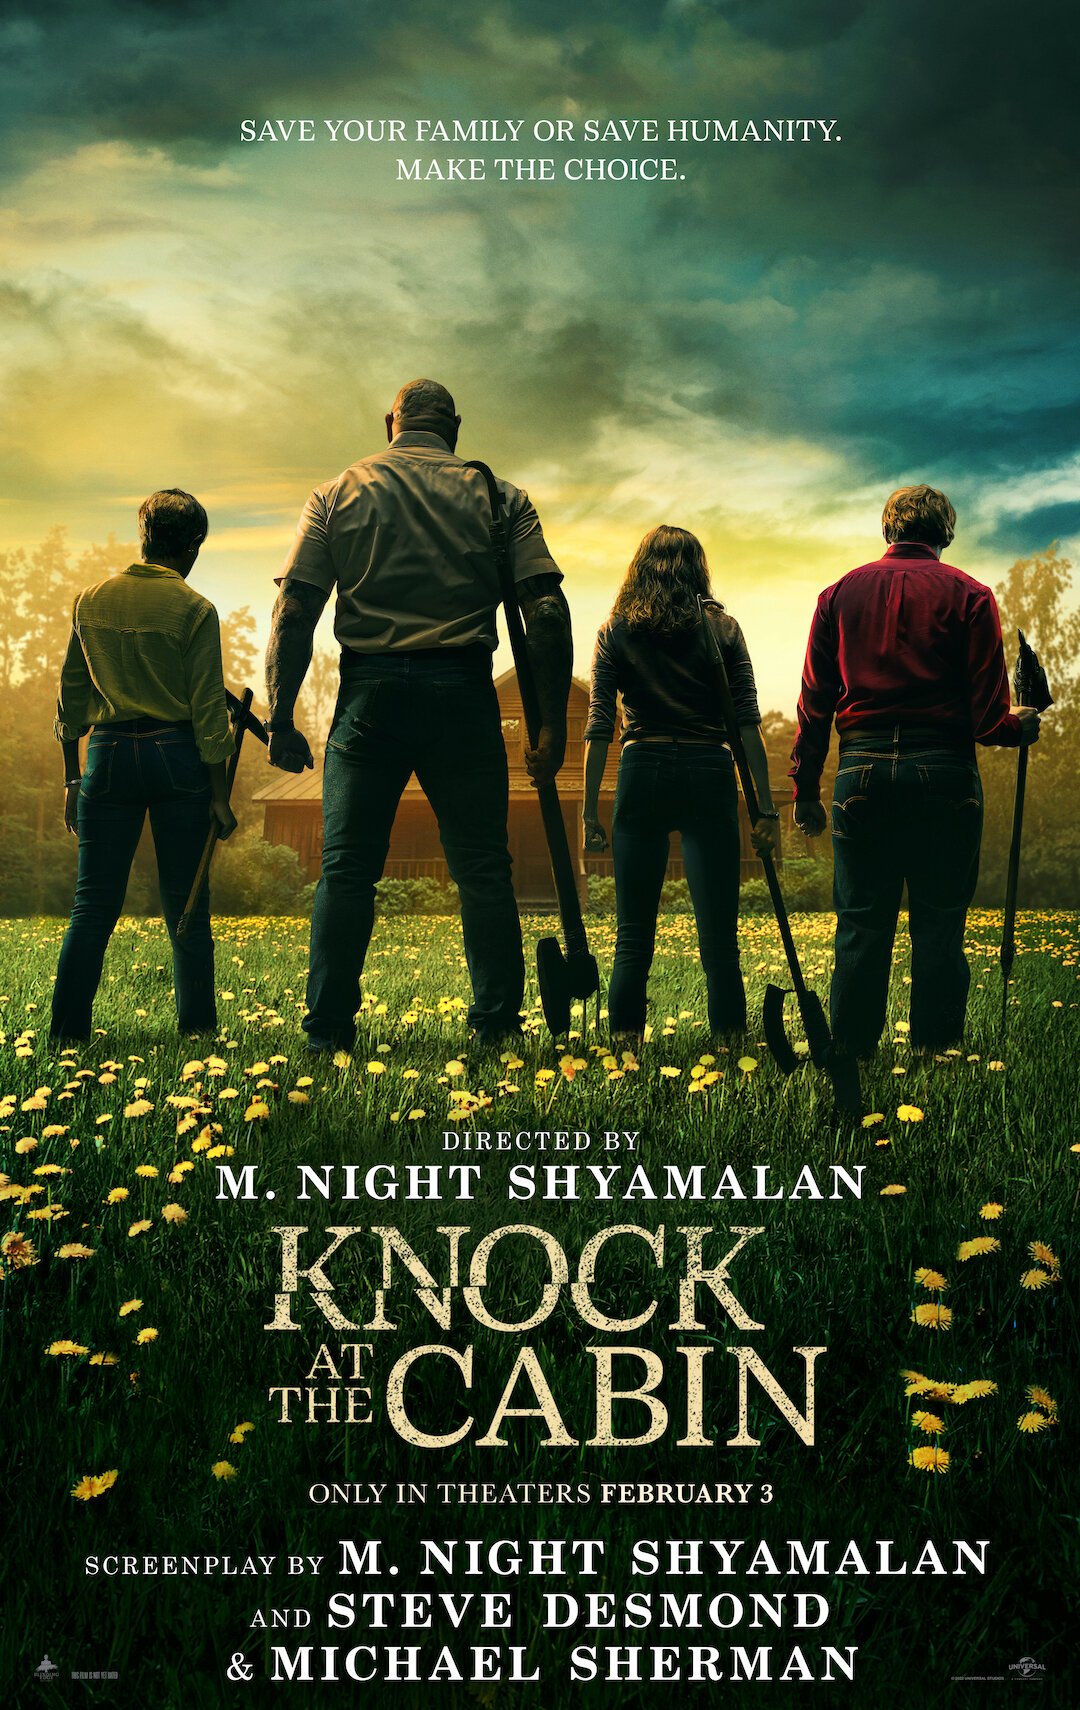 Knock At The Cabin images © Universal Pictures